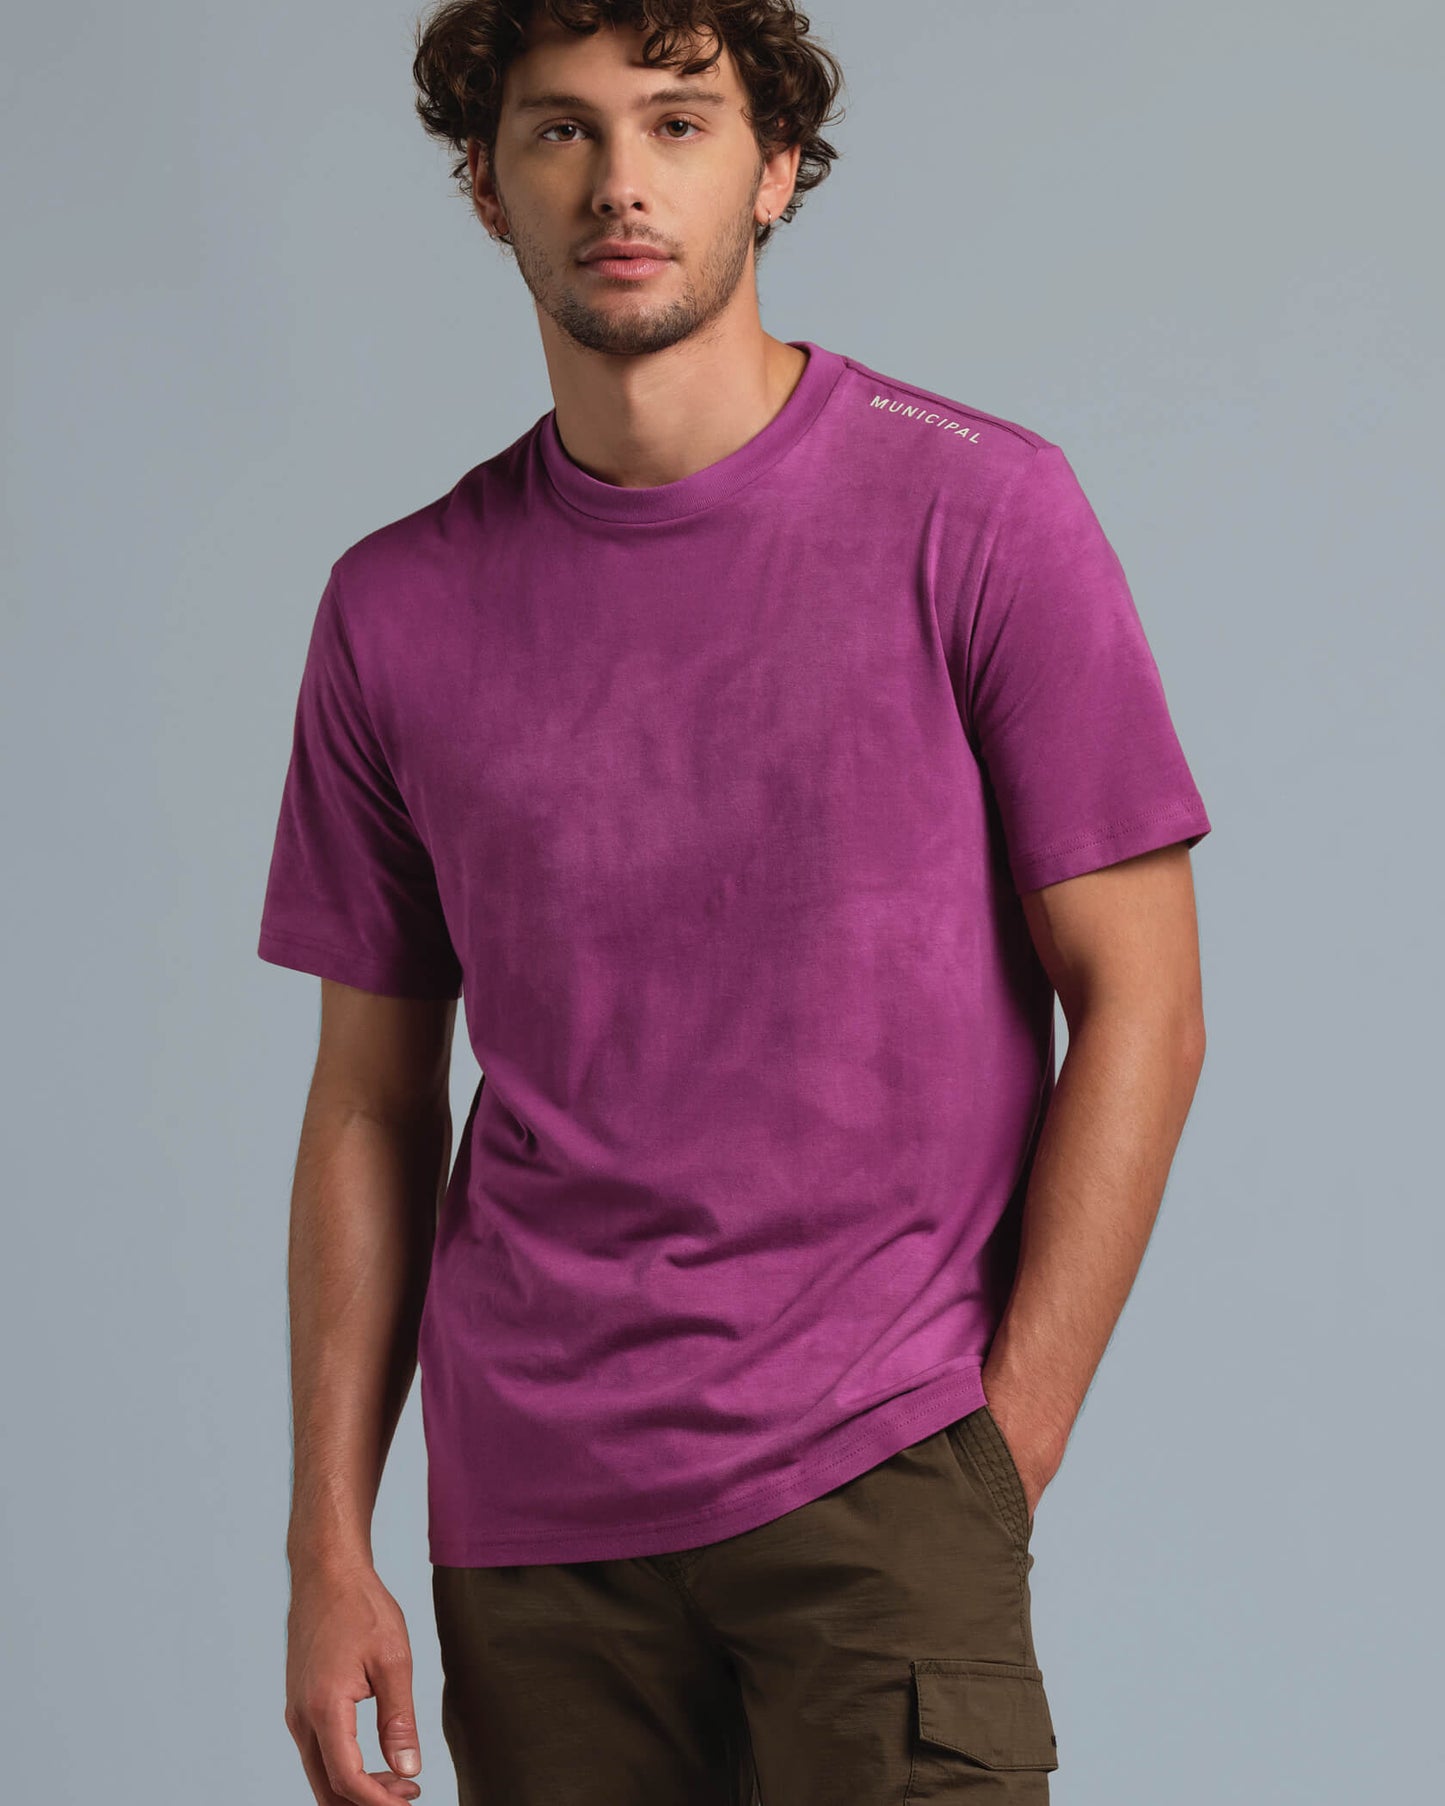 Enduro Stretch T-Shirt |Bright Berry Color Wash| front